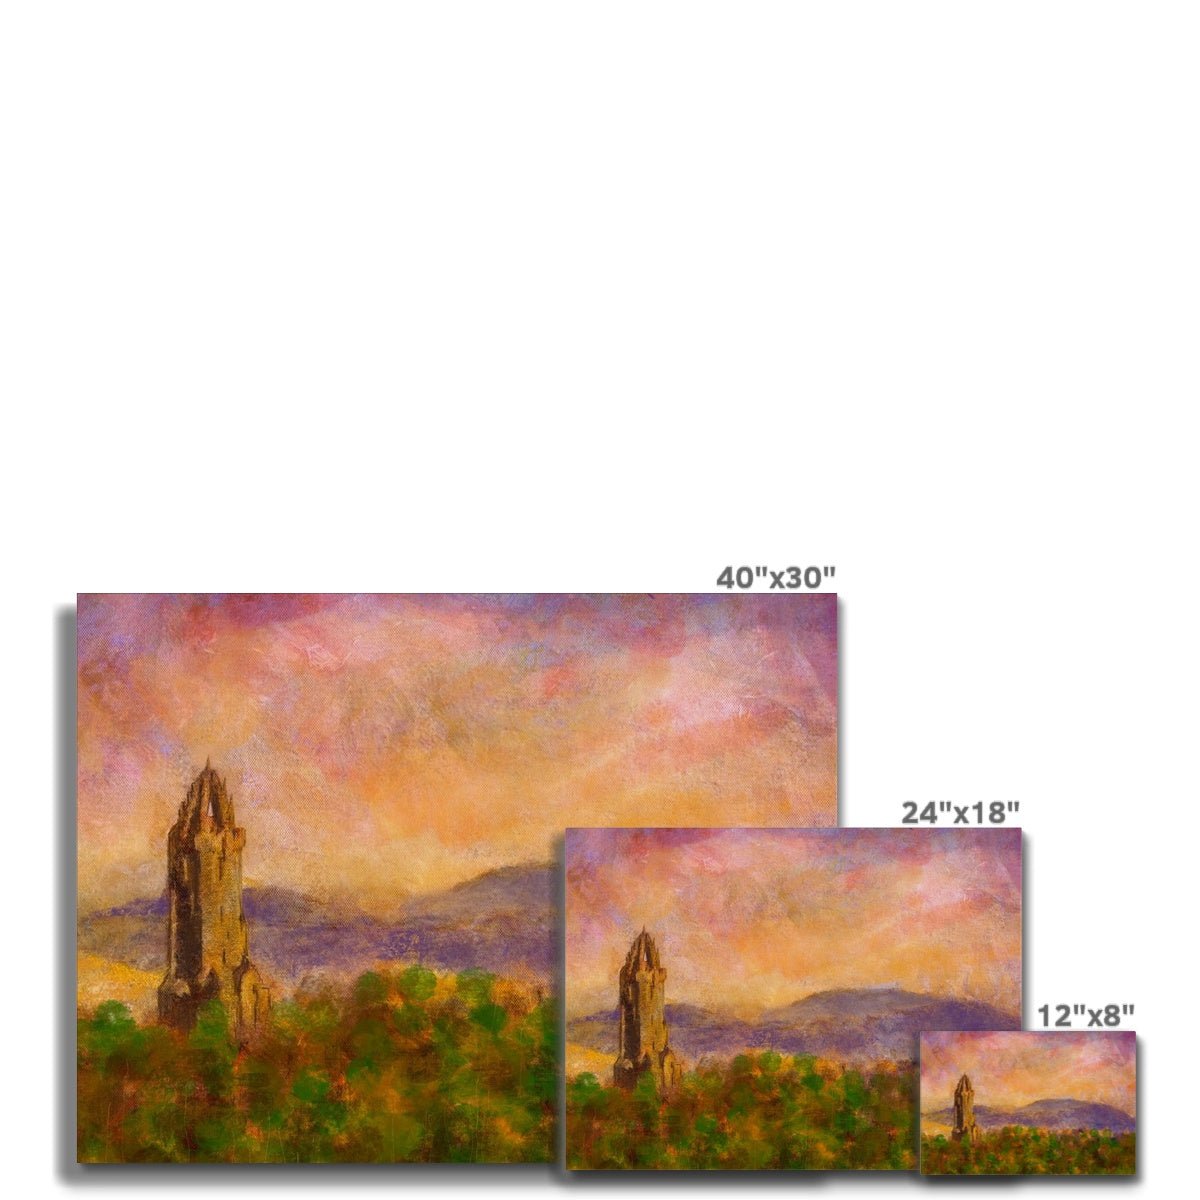 Wallace Monument Dusk Painting | Canvas From Scotland-Contemporary Stretched Canvas Prints-Historic & Iconic Scotland Art Gallery-Paintings, Prints, Homeware, Art Gifts From Scotland By Scottish Artist Kevin Hunter